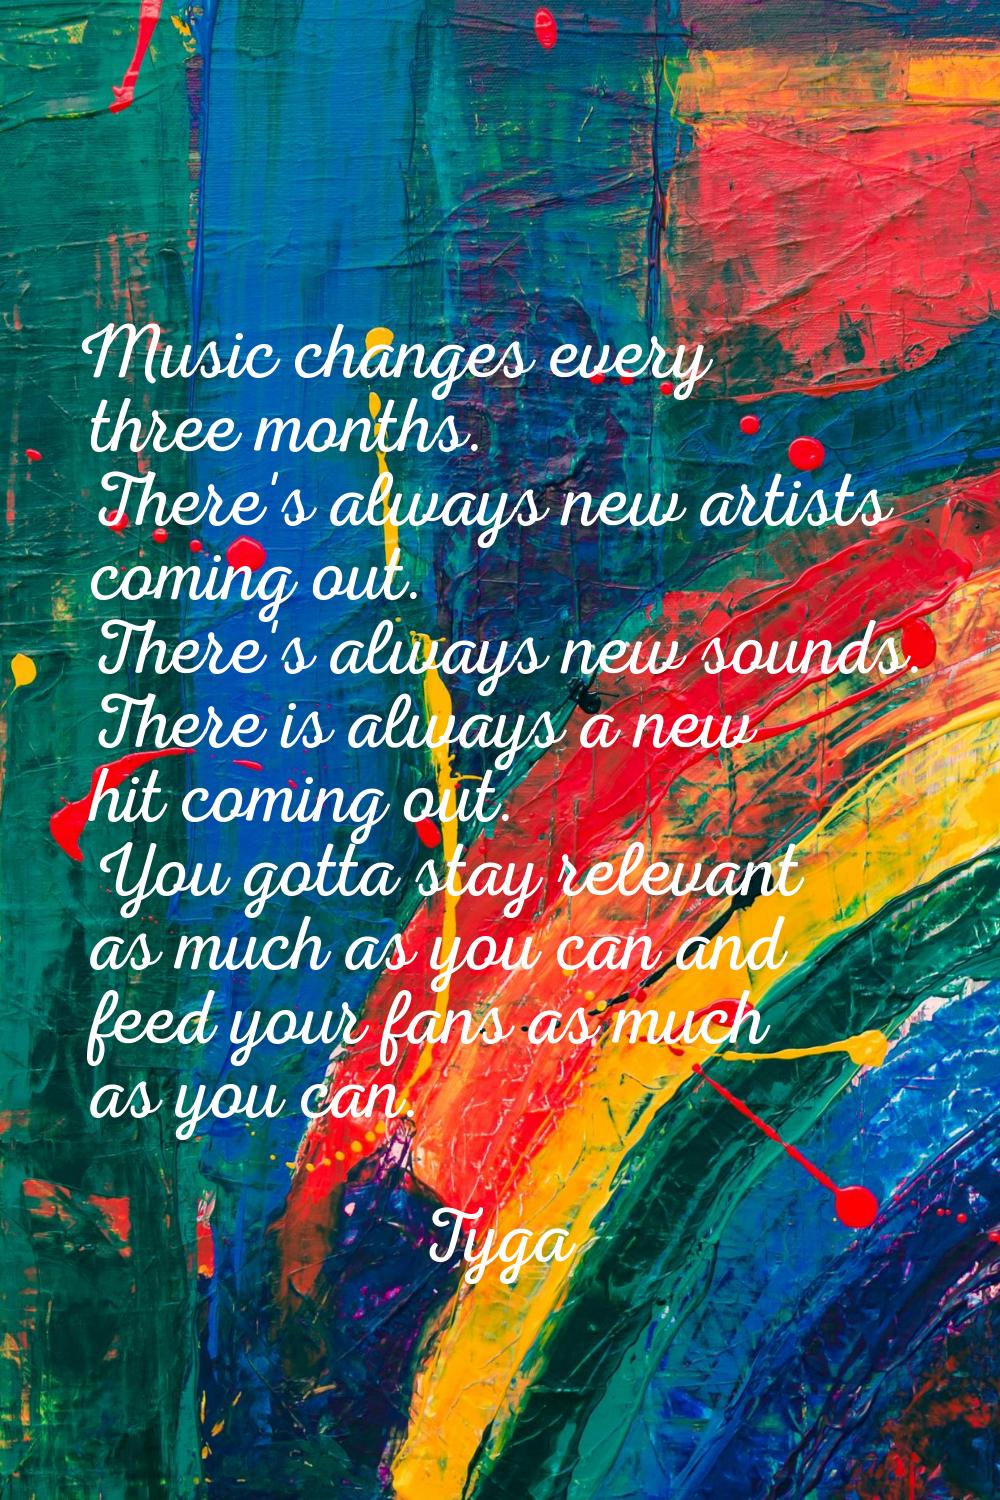 Music changes every three months. There's always new artists coming out. There's always new sounds.